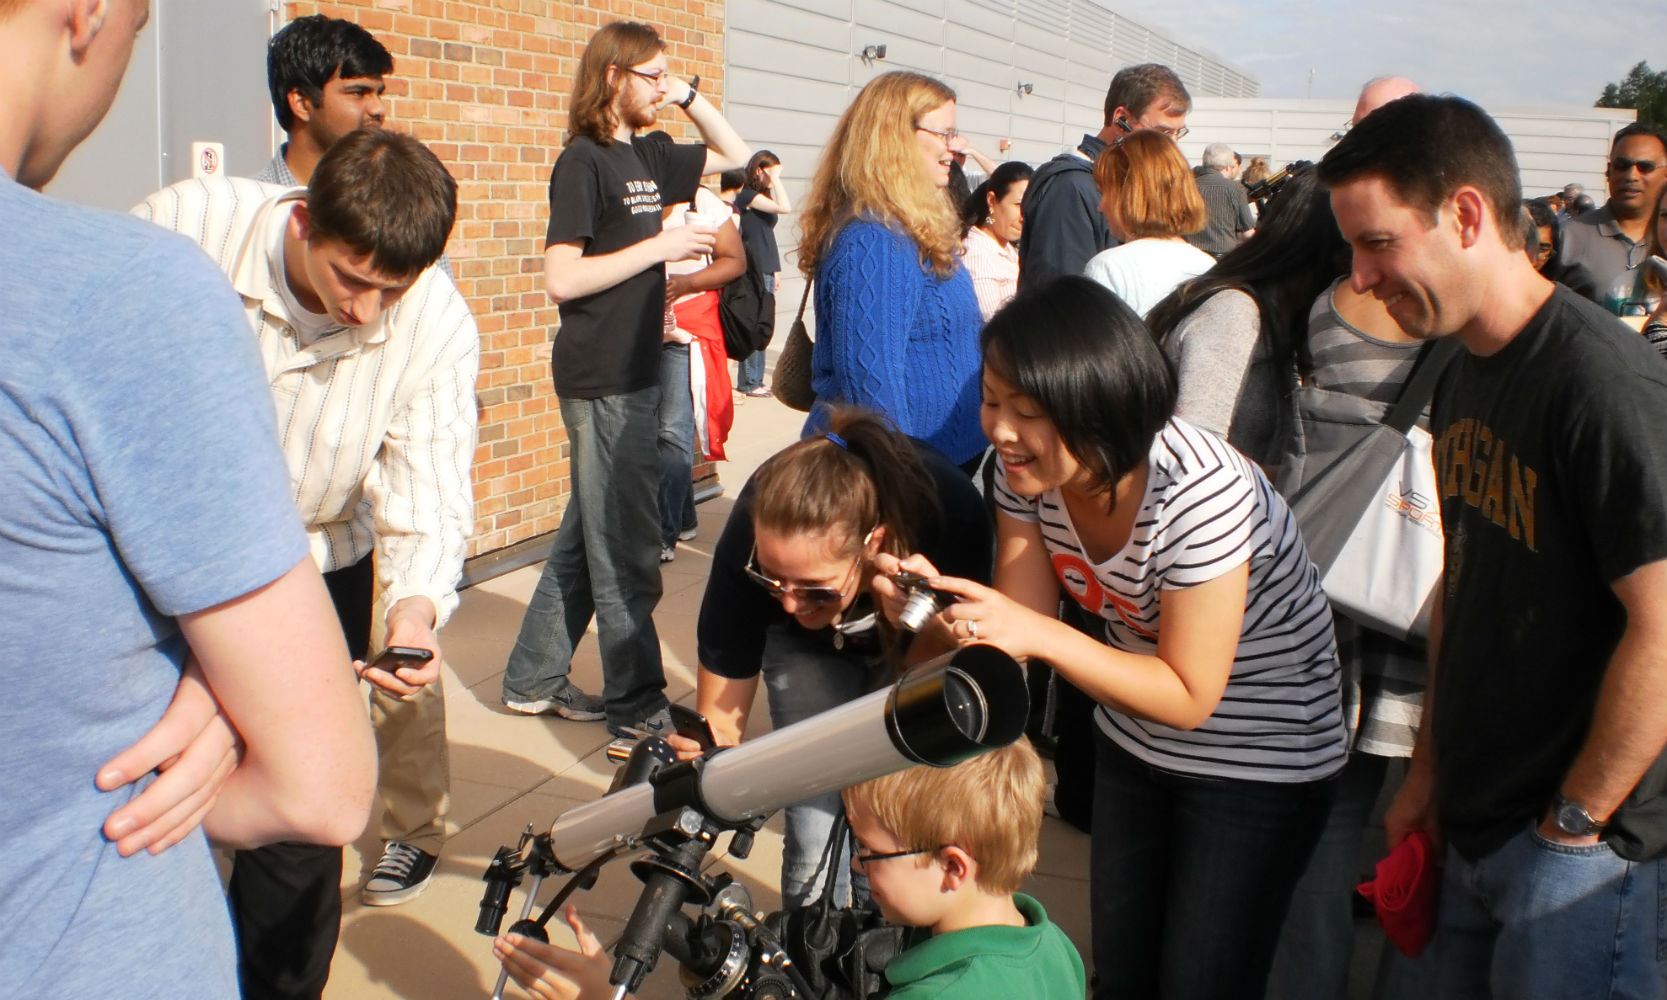 Public observation at the Observatory. Parents and children gather around a telescope outside.